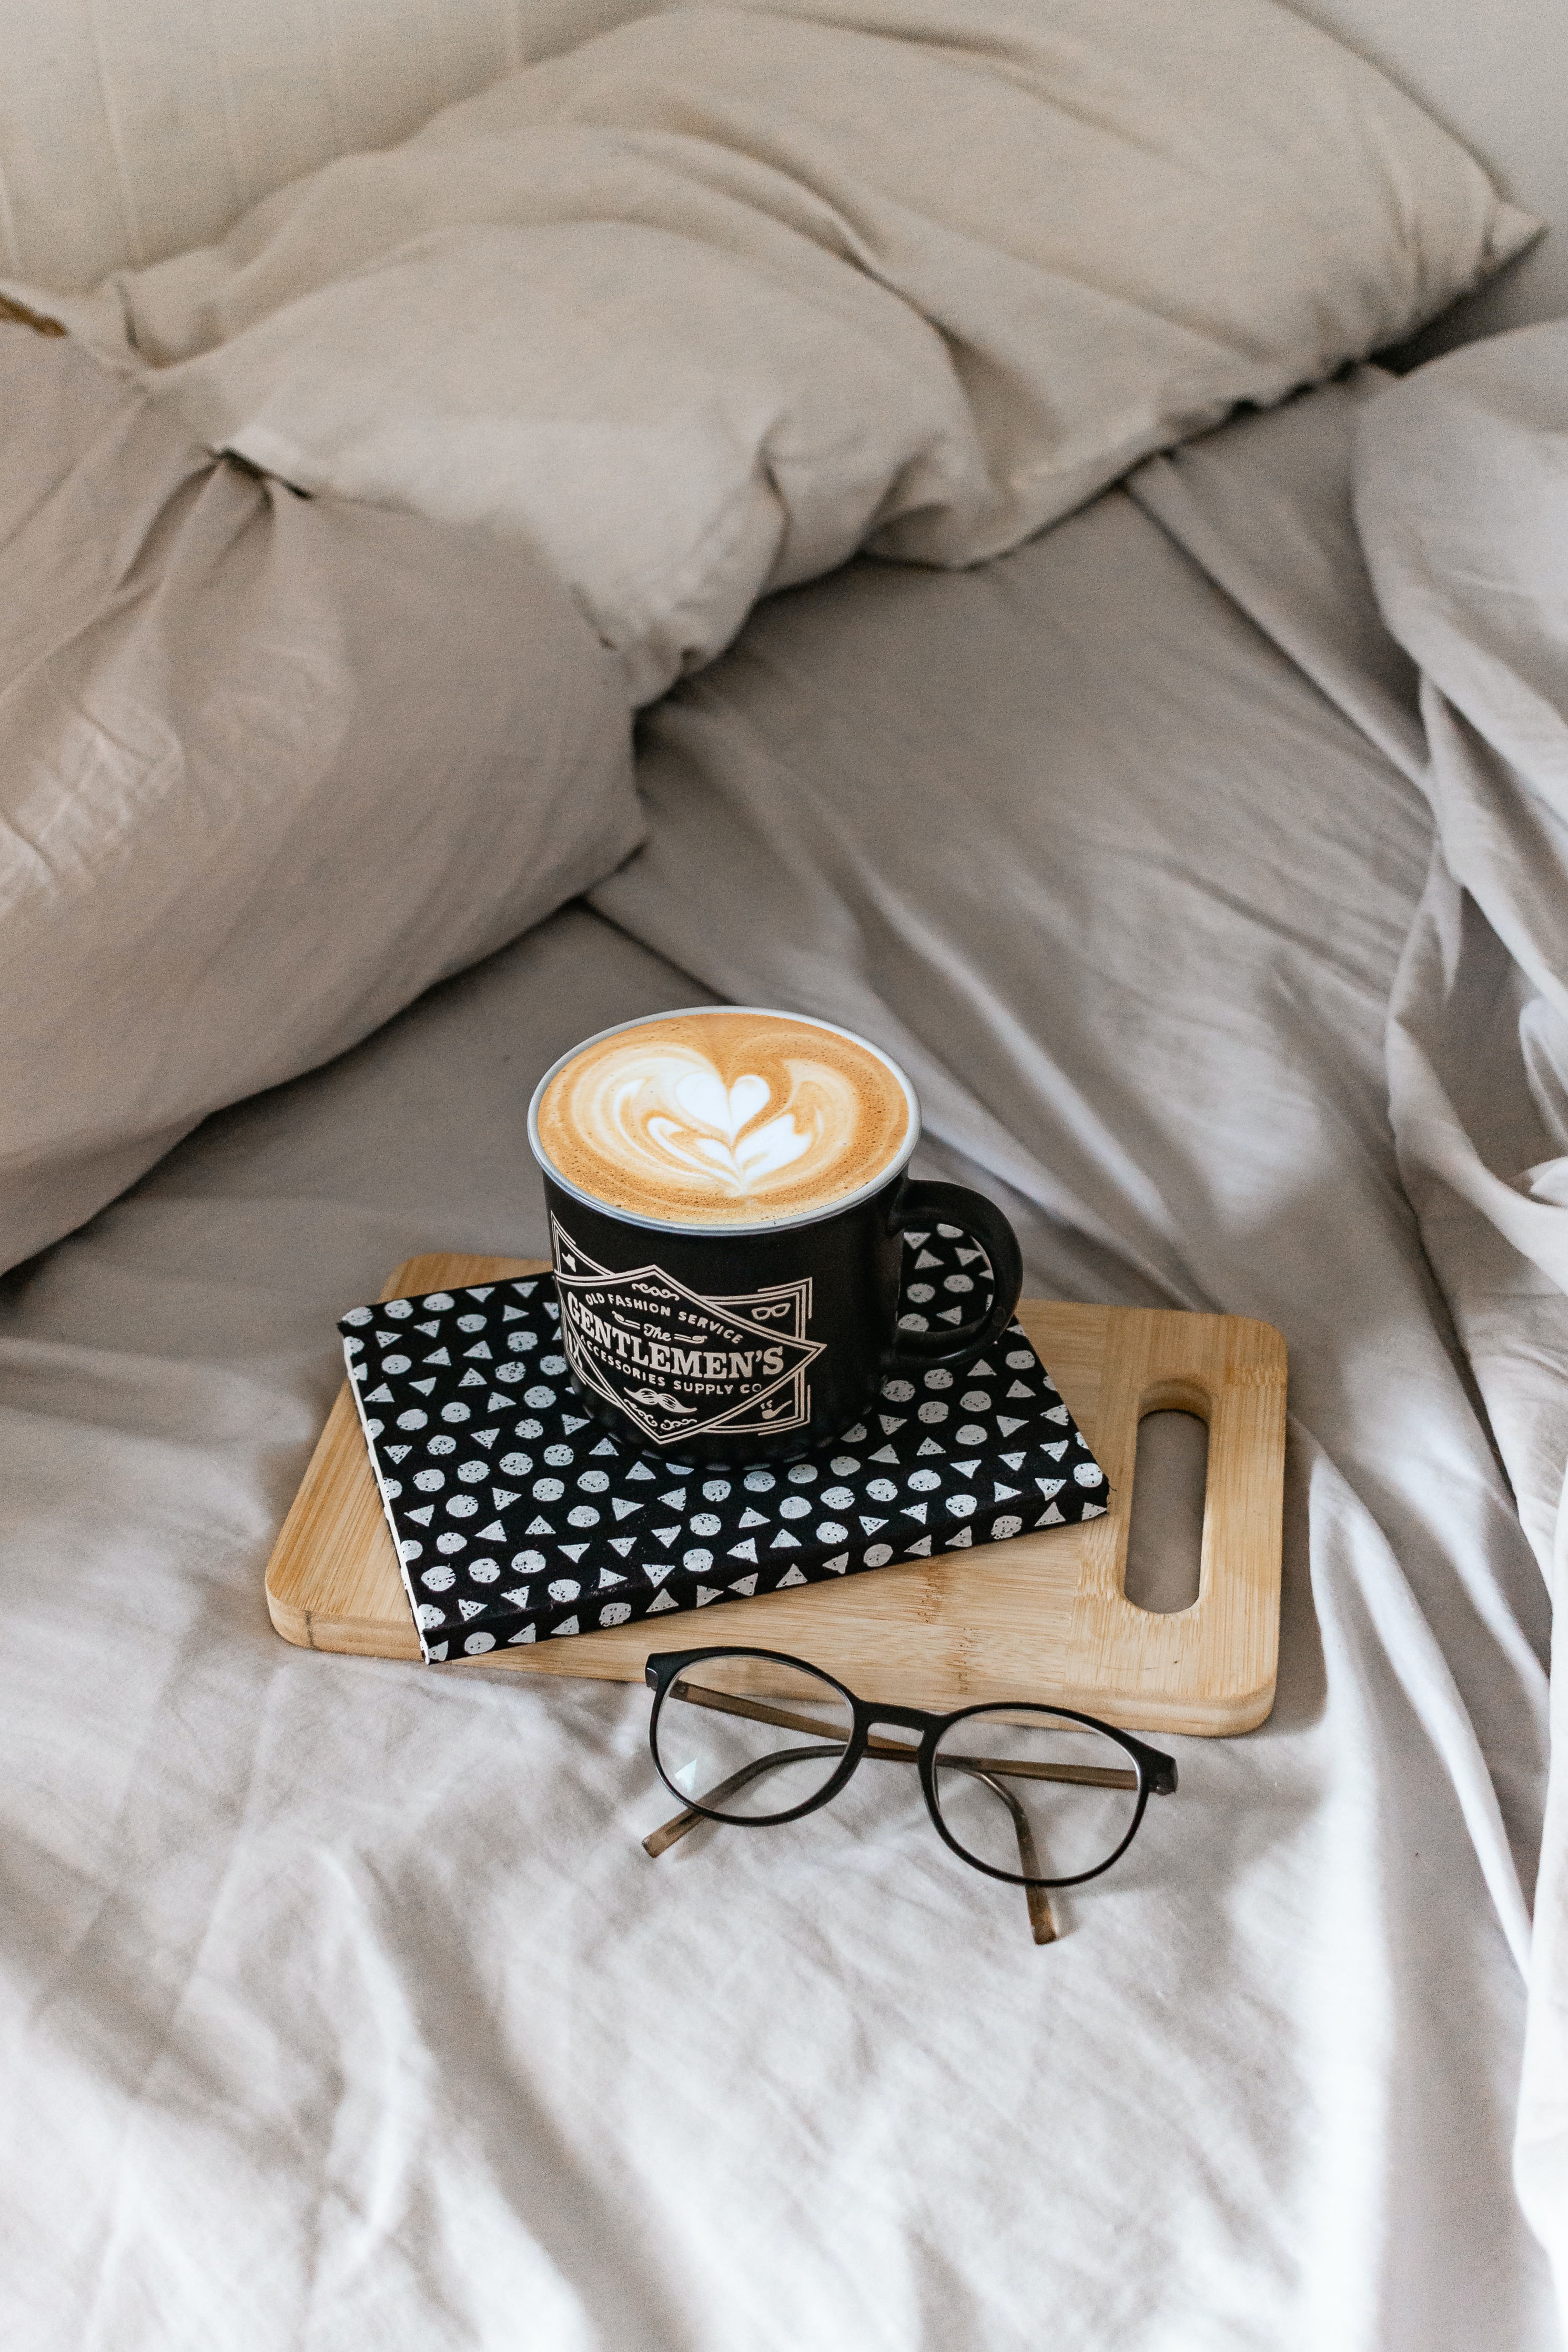 cappuccino, miscellanea, miscellaneous, cup, book, bed, glasses, spectacles